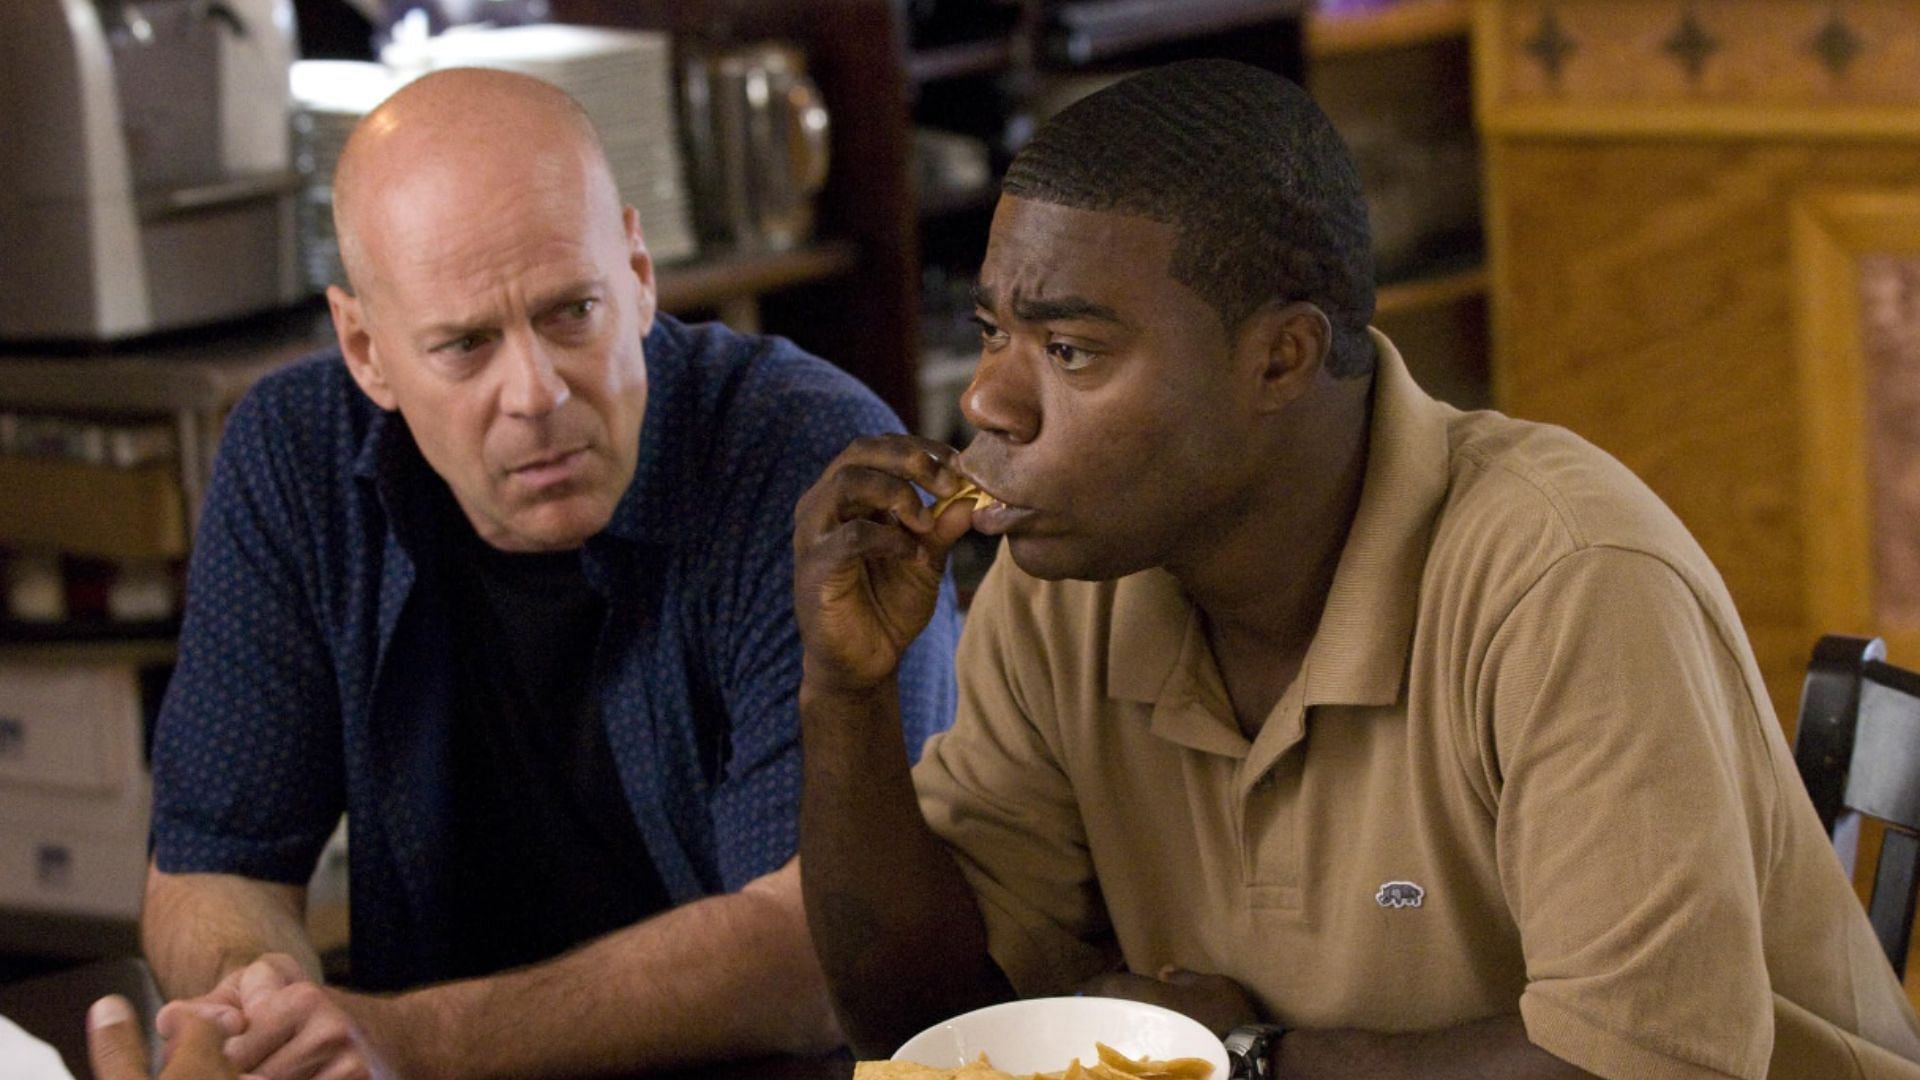 Bruce Willis and Tracy Morgan have great chemistry in this buddy cop movie (Image via Warner Bros. Entertainment, Inc)